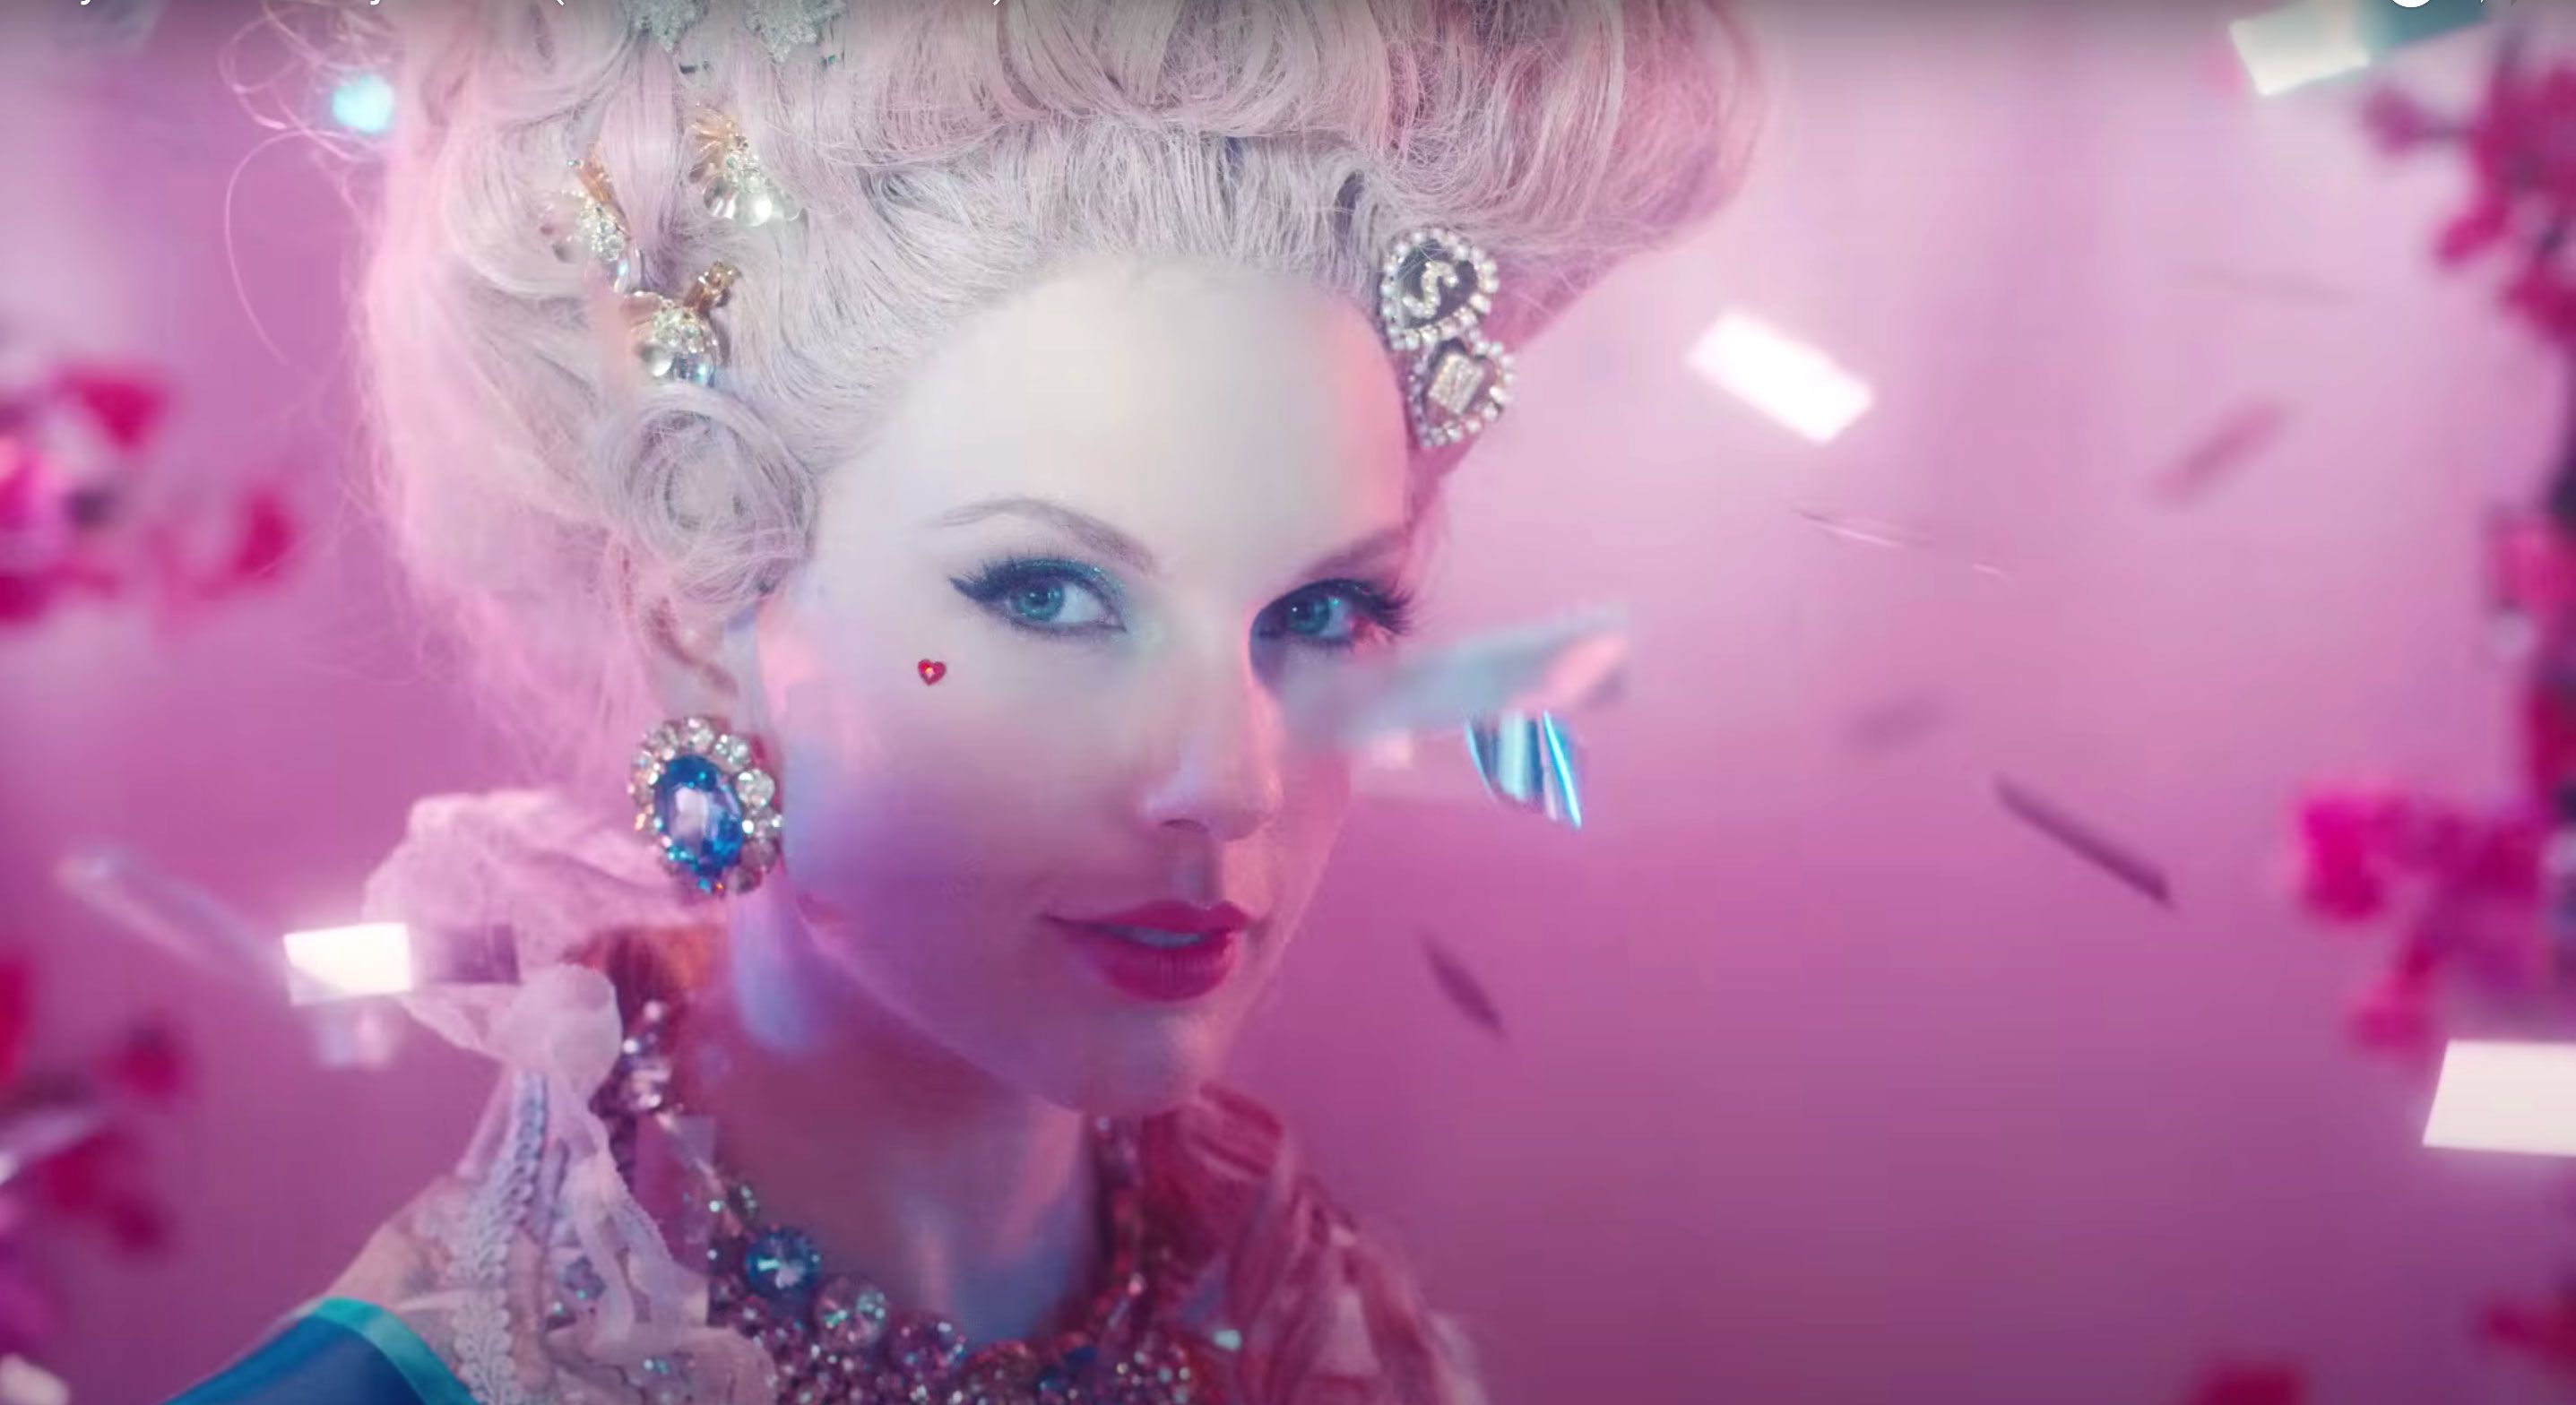 Taylor Swift's 'Bejeweled' Music Video Easter Eggs Explained